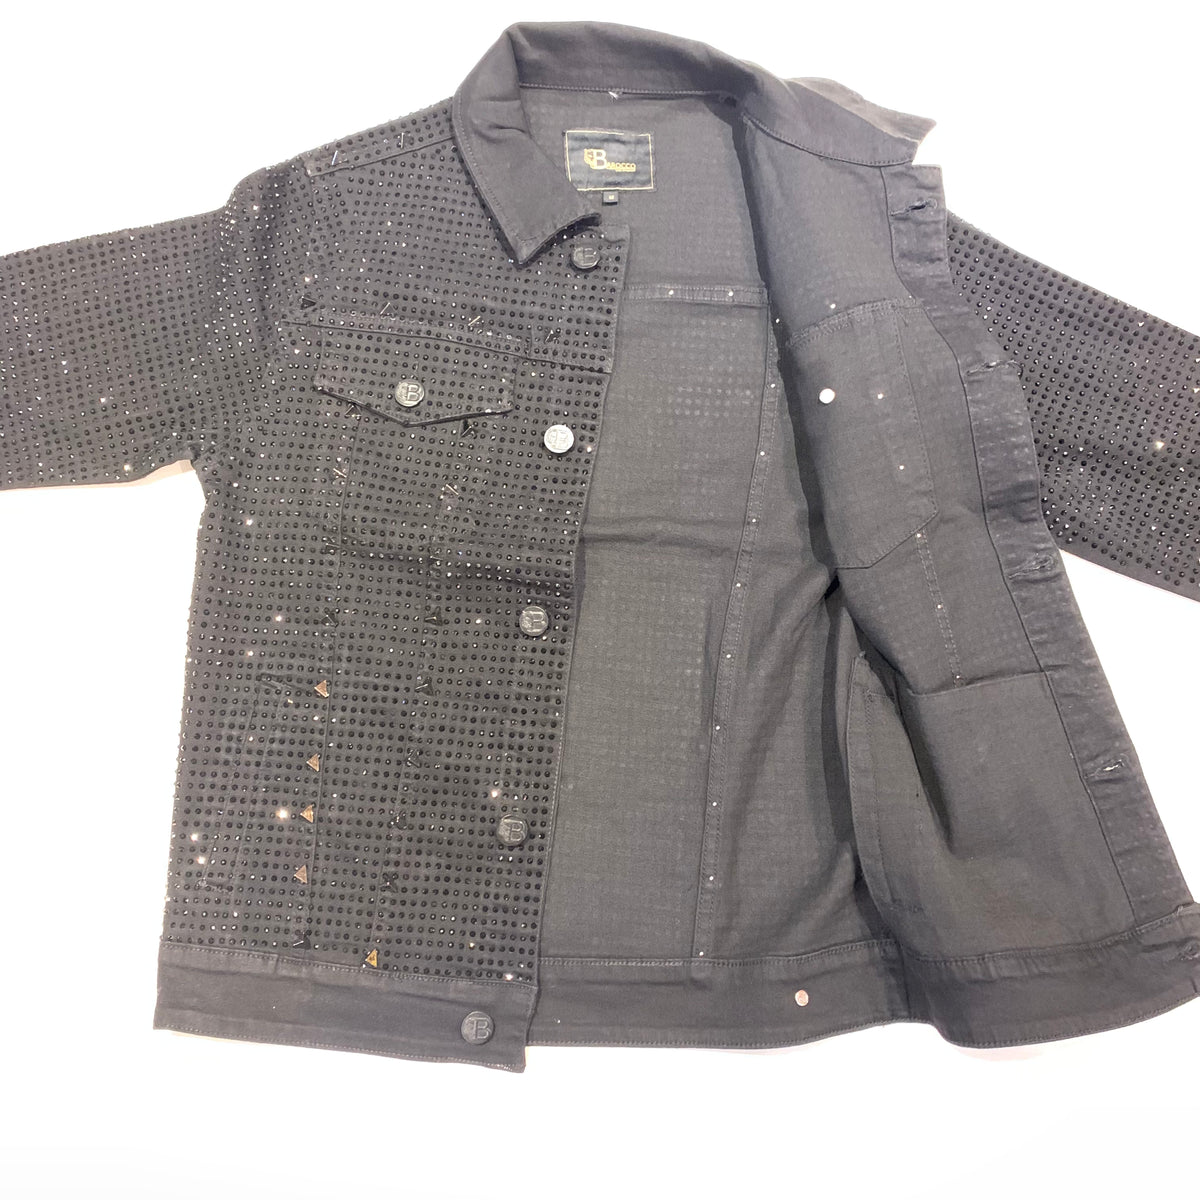 Barocco Men's Black Fully Loaded Crystal Spiked Jeans Jacket - Dudes Boutique